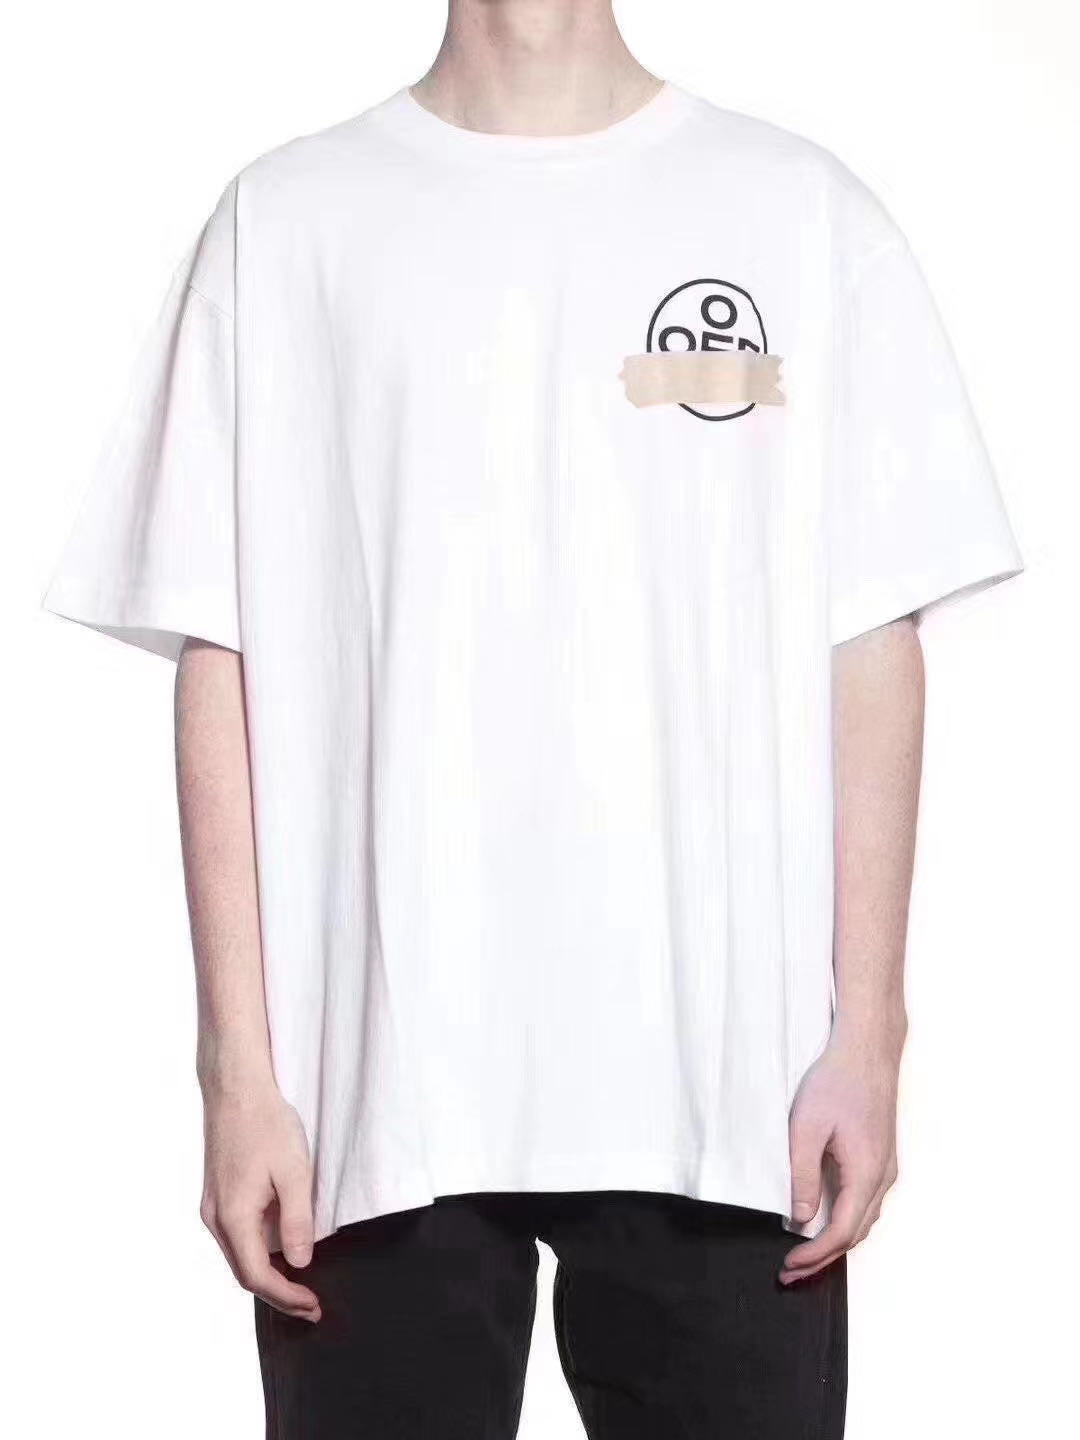 Off-white tape arrows s/s over tee